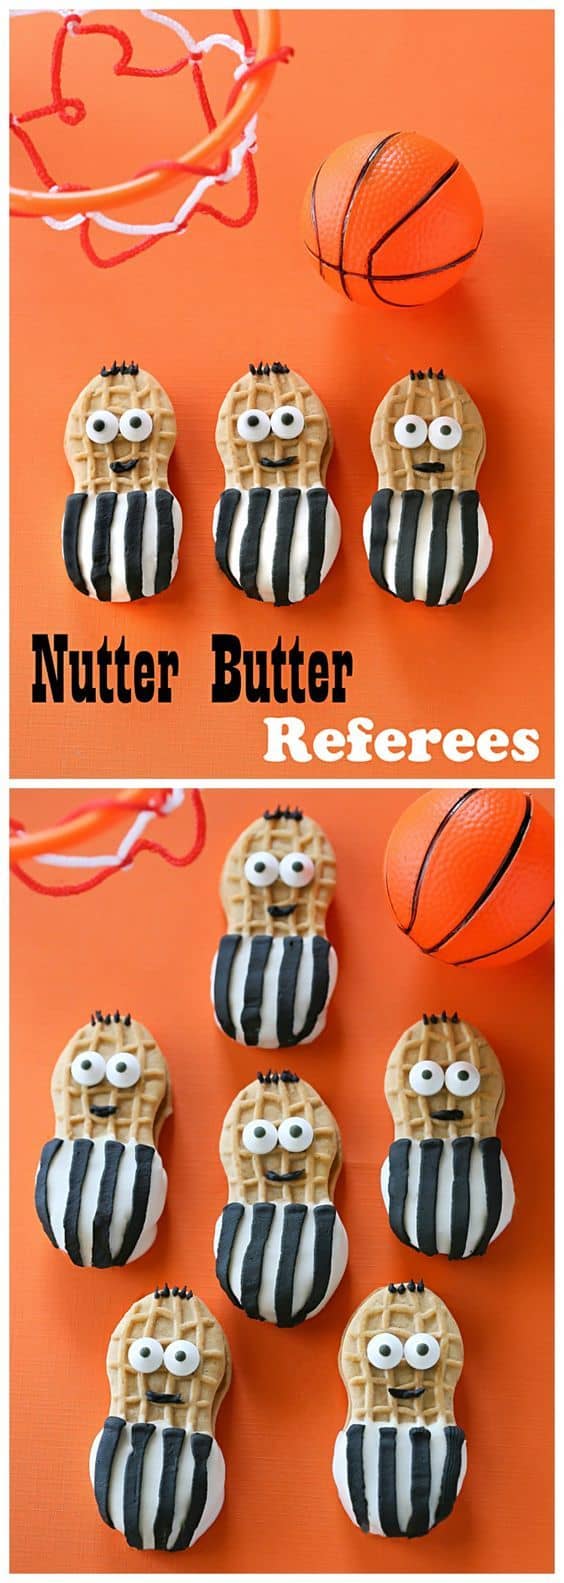 Make the right call with this quick treat for March Madness. Nutter Butter Referees are cookies dipped in white chocolate and dressed up as referees. the-girl-who-ate-everything.com